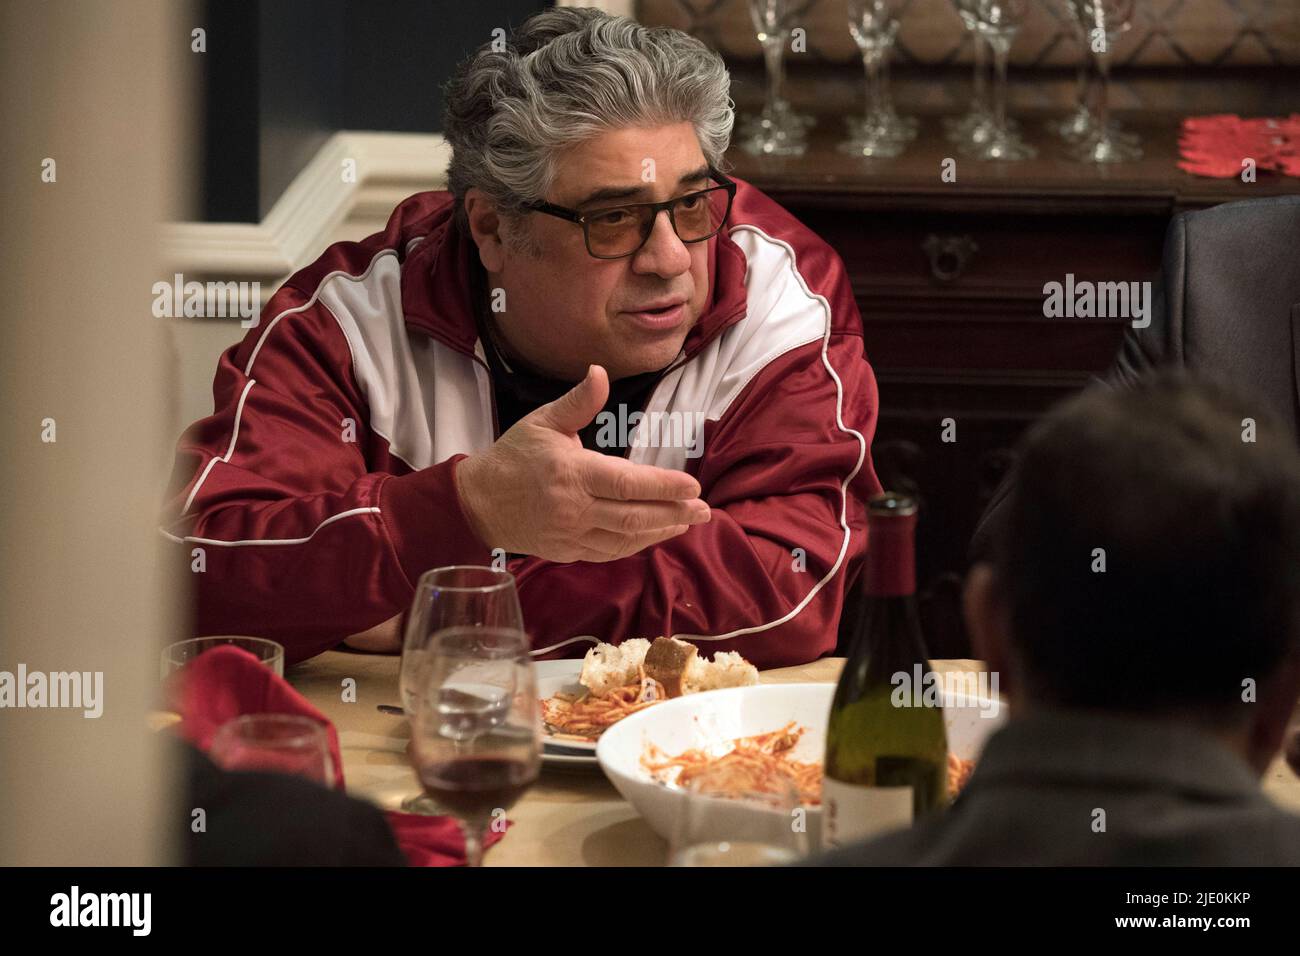 VINCENT PASTORE in THE BIRTHDAY CAKE (2021), directed by JIMMY GIANNOPOULOS. Credit: SSS Entertainment / Album Stock Photo